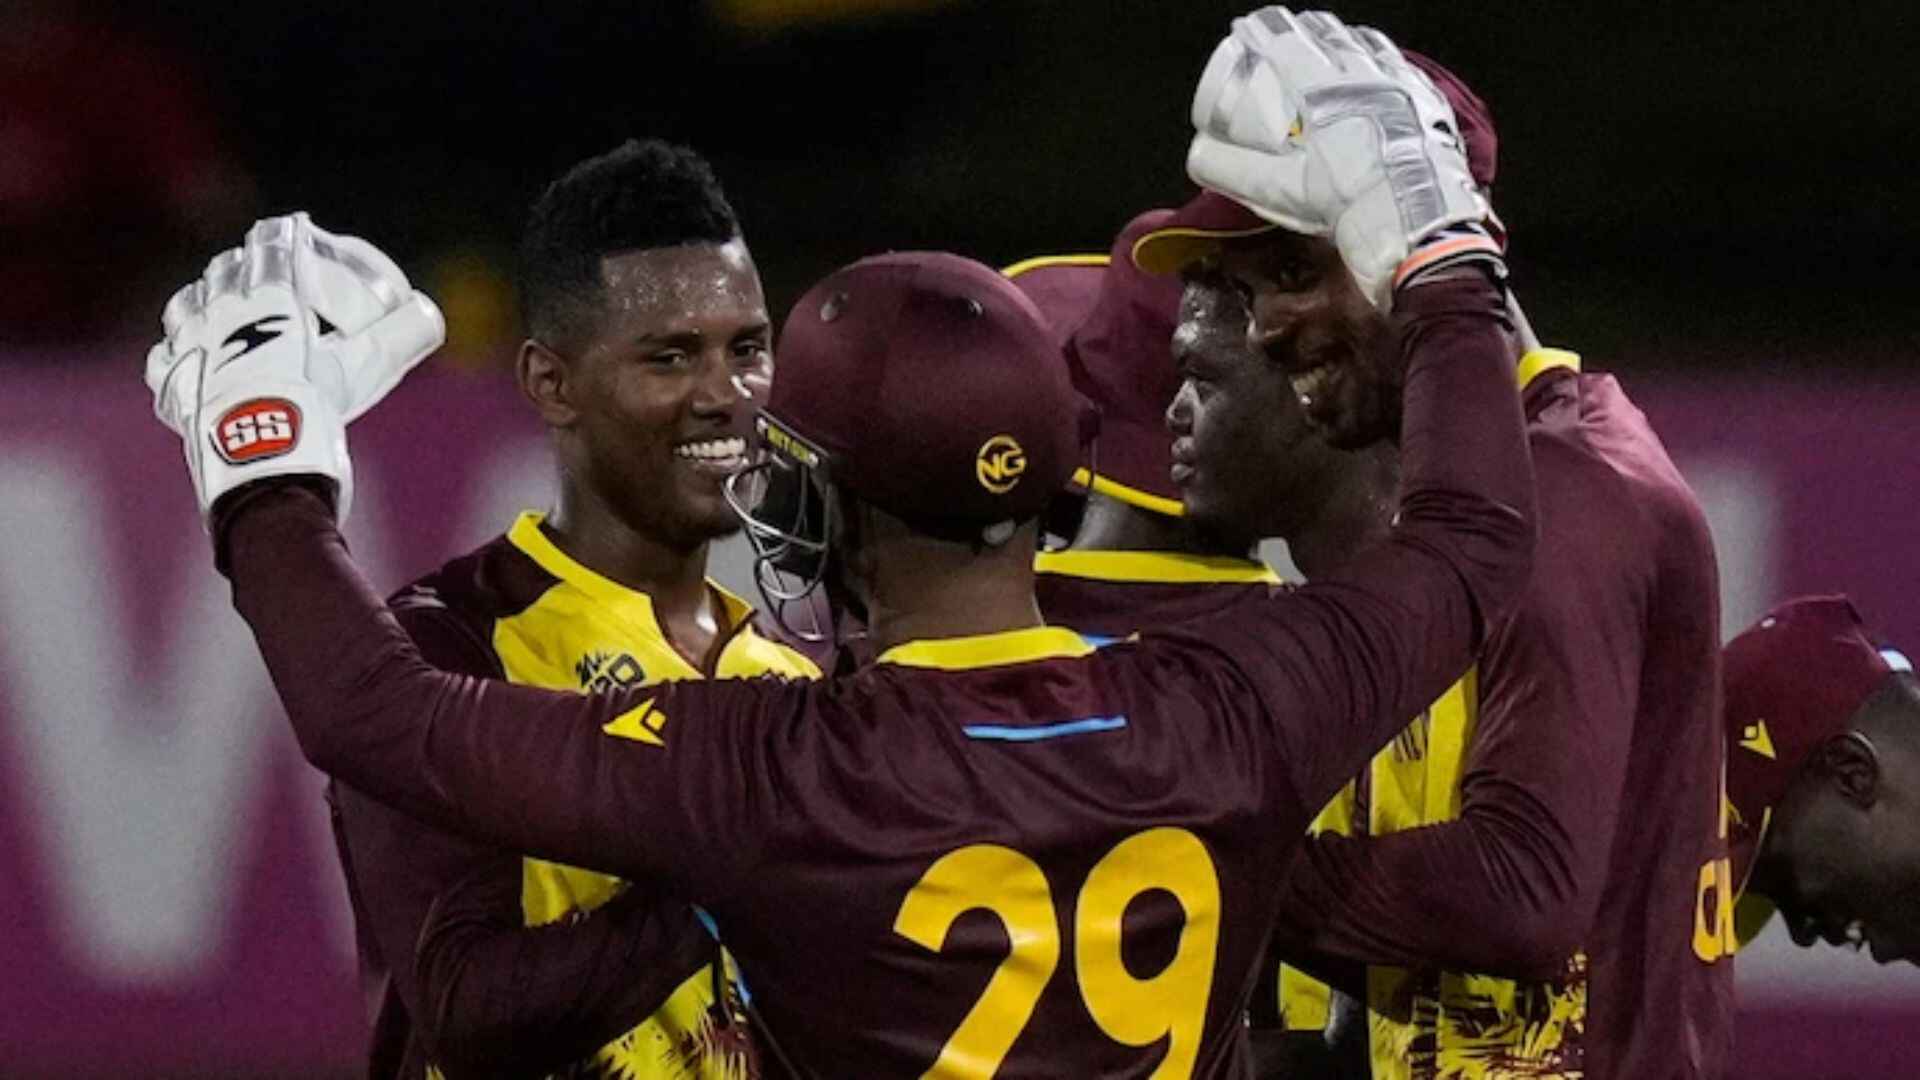 Windies Celebrating Their Victory Over The Kiwis